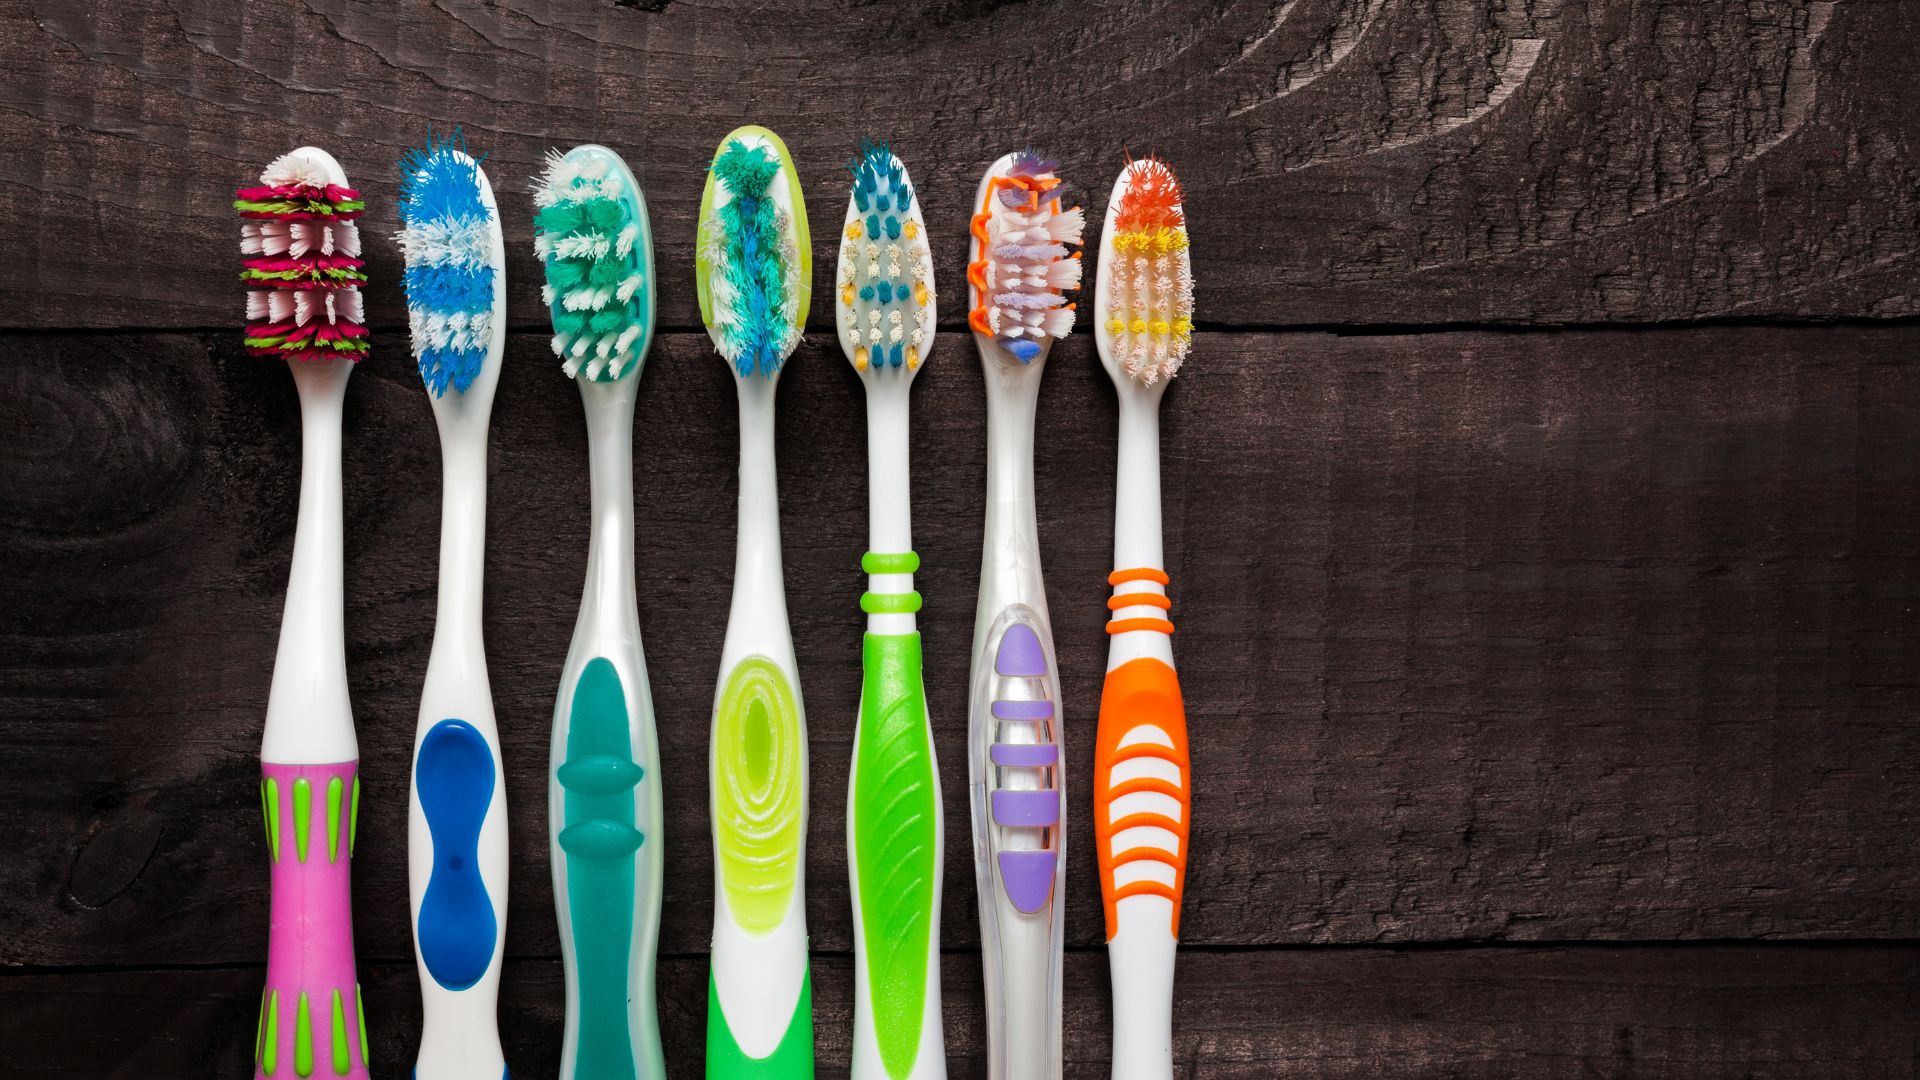 M16781 - Blog - 4 Signs Its Time For A New Toothbrush - FEATURED IMAGE